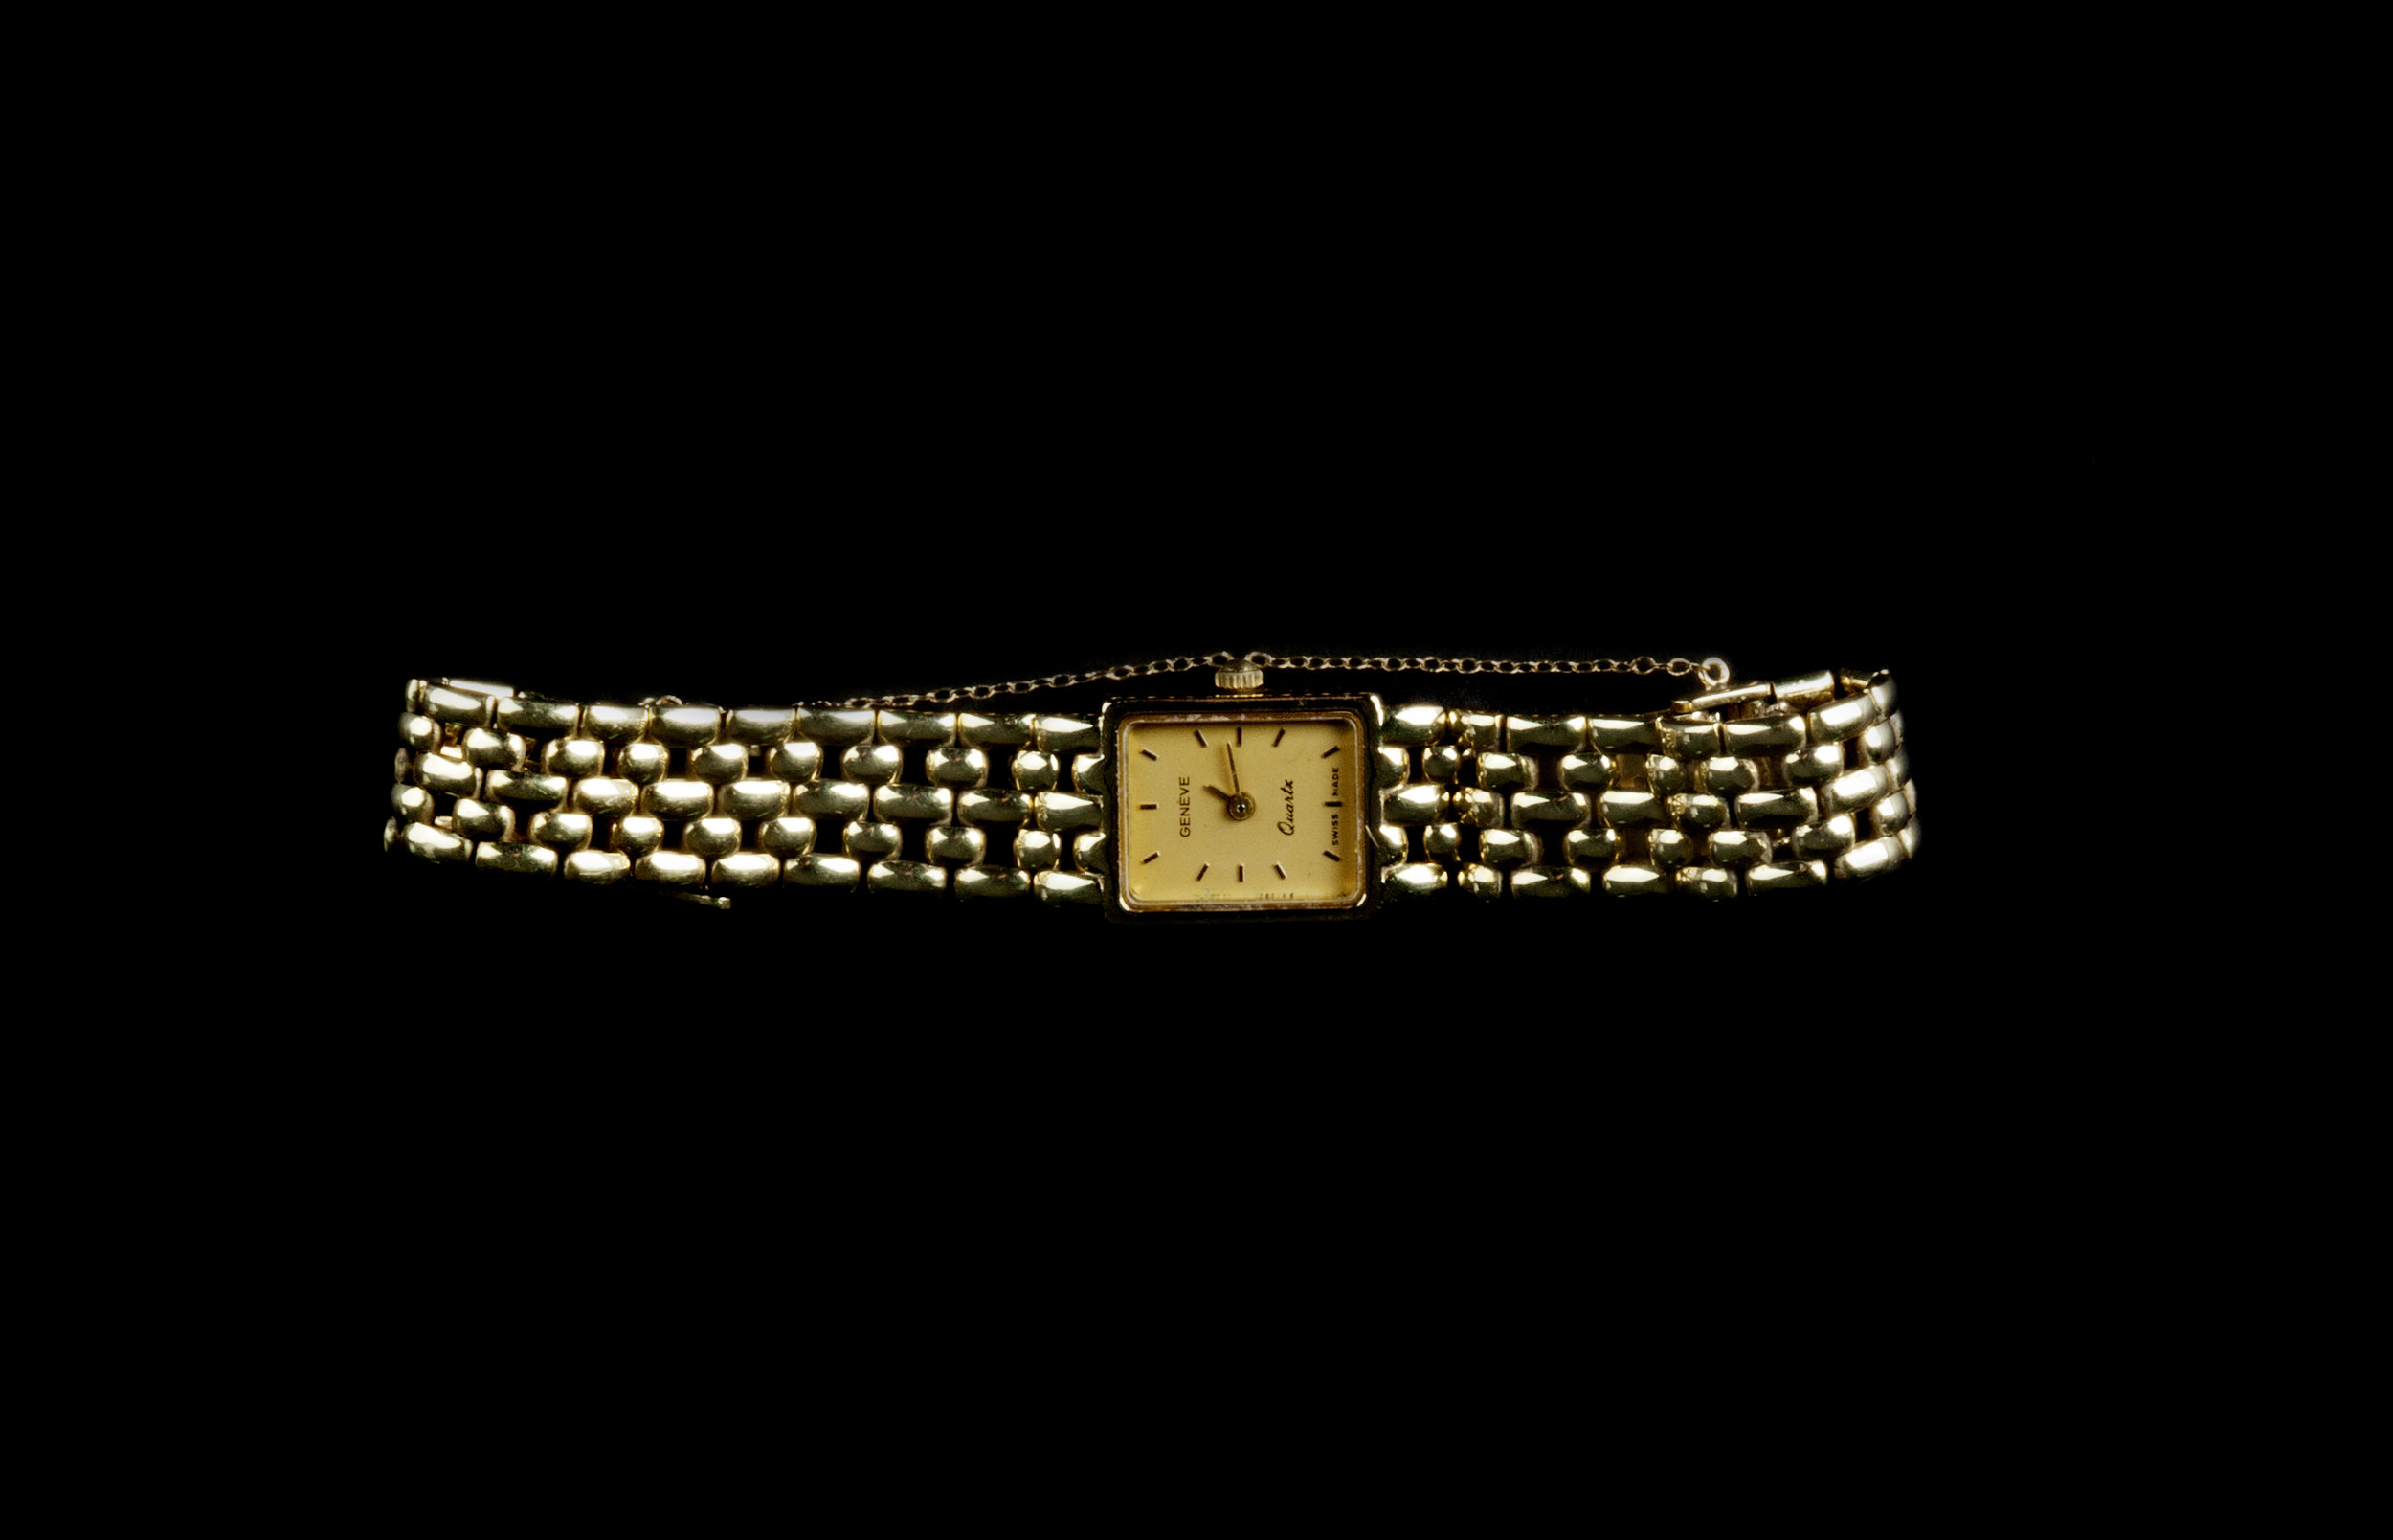  A square watch on a gold link band with a safety chain.  The watch is stretched out horizontally, showing the whole of its ivory face with roman numerals and gold pusher at the top. 